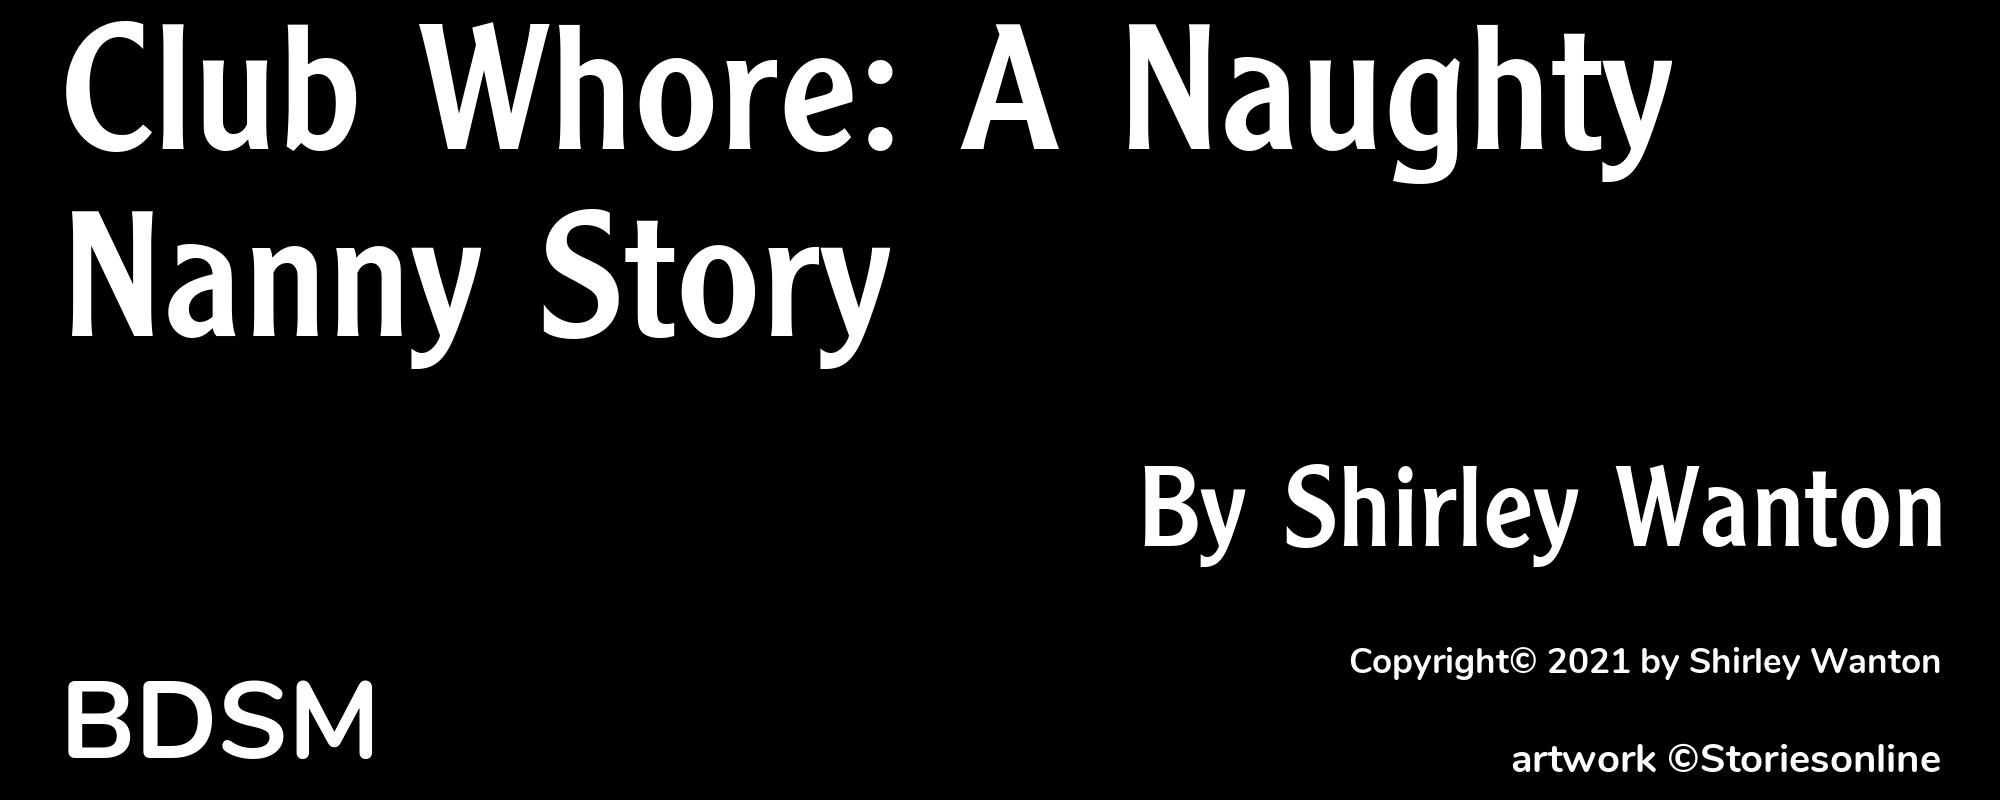 Club Whore: A Naughty Nanny Story - Cover